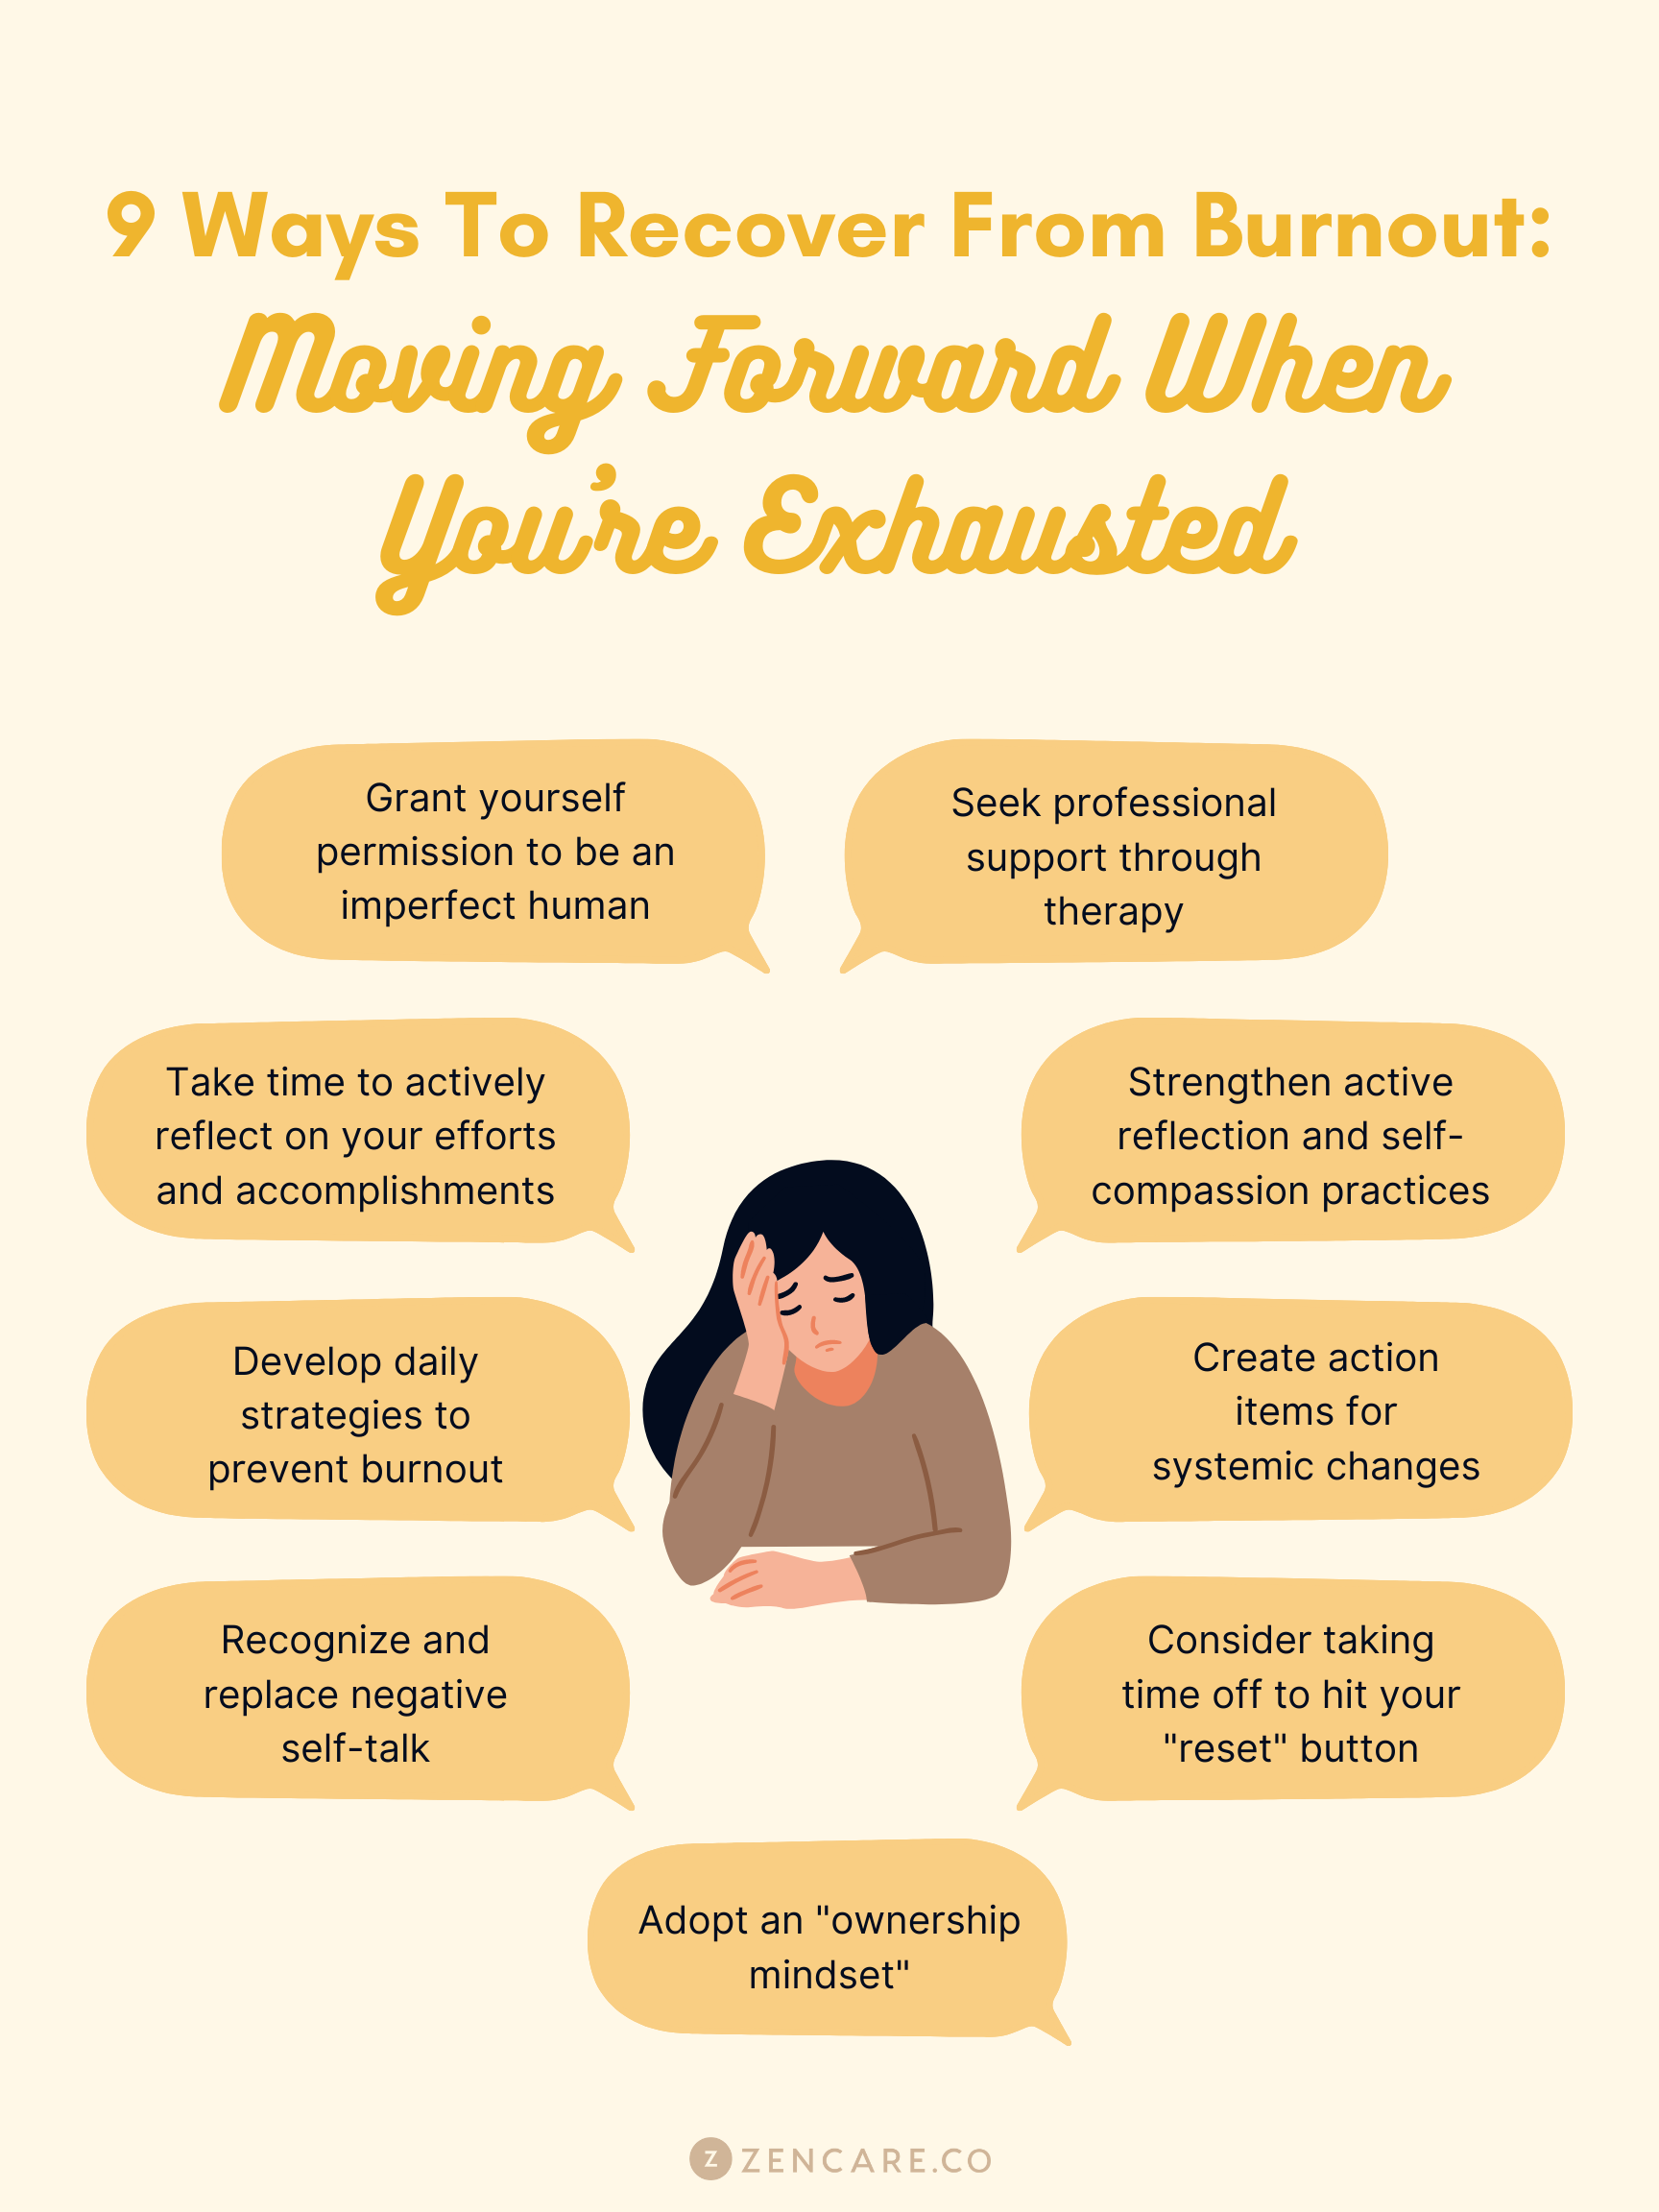 9 Ways To Recover From Burnout: Moving Forward When You're Exhausted Guide by Zencare